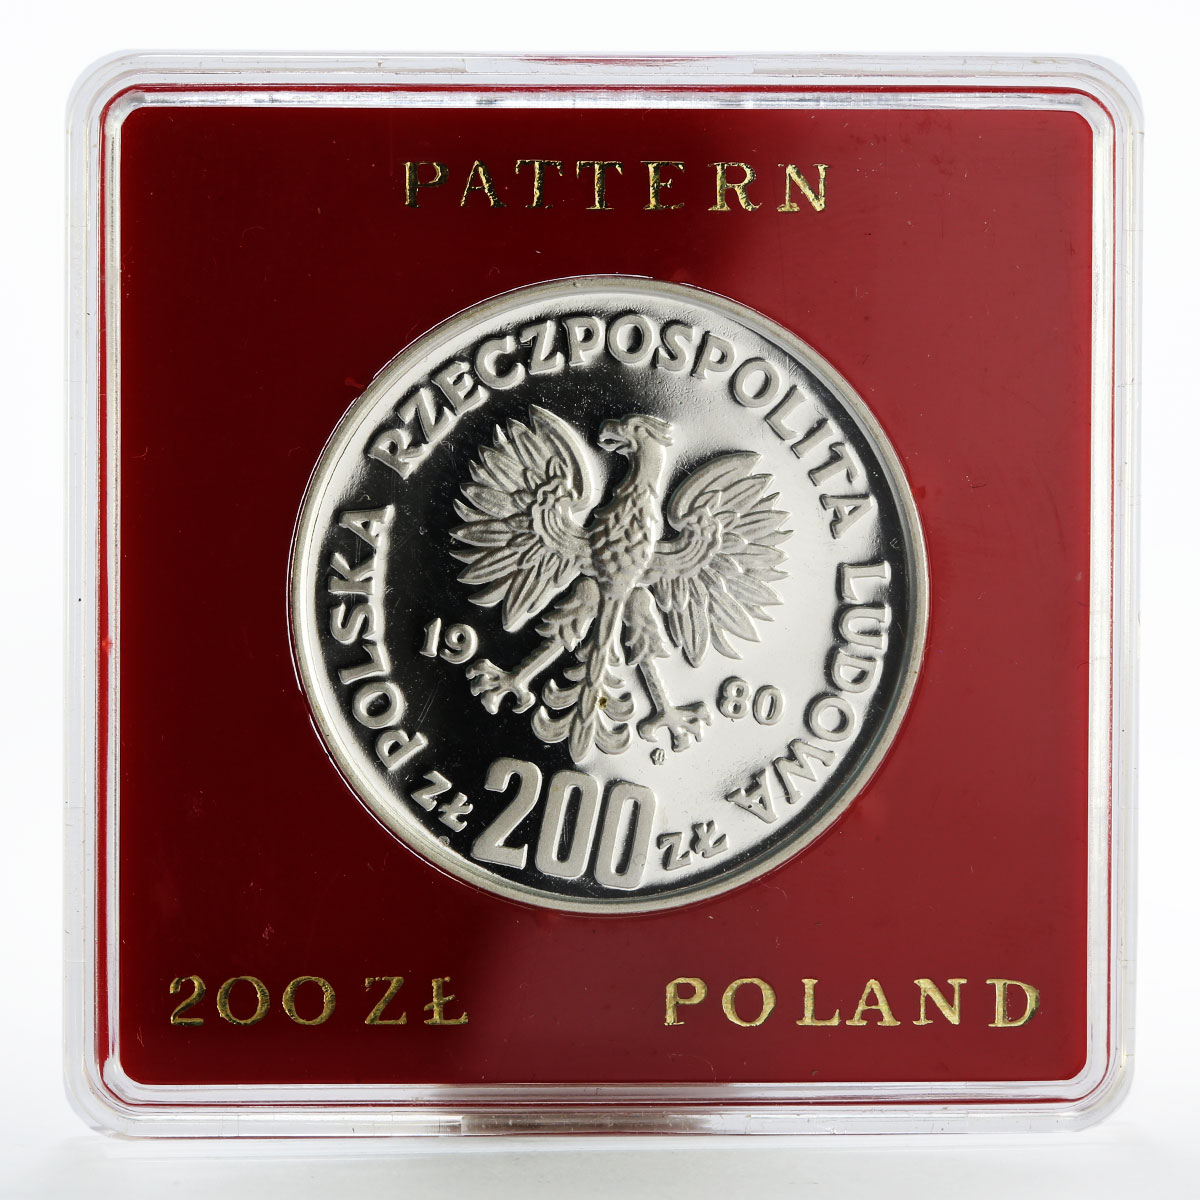 Poland 200 zlotych King Boleslaw the First Brave proba proof silver coin 1980